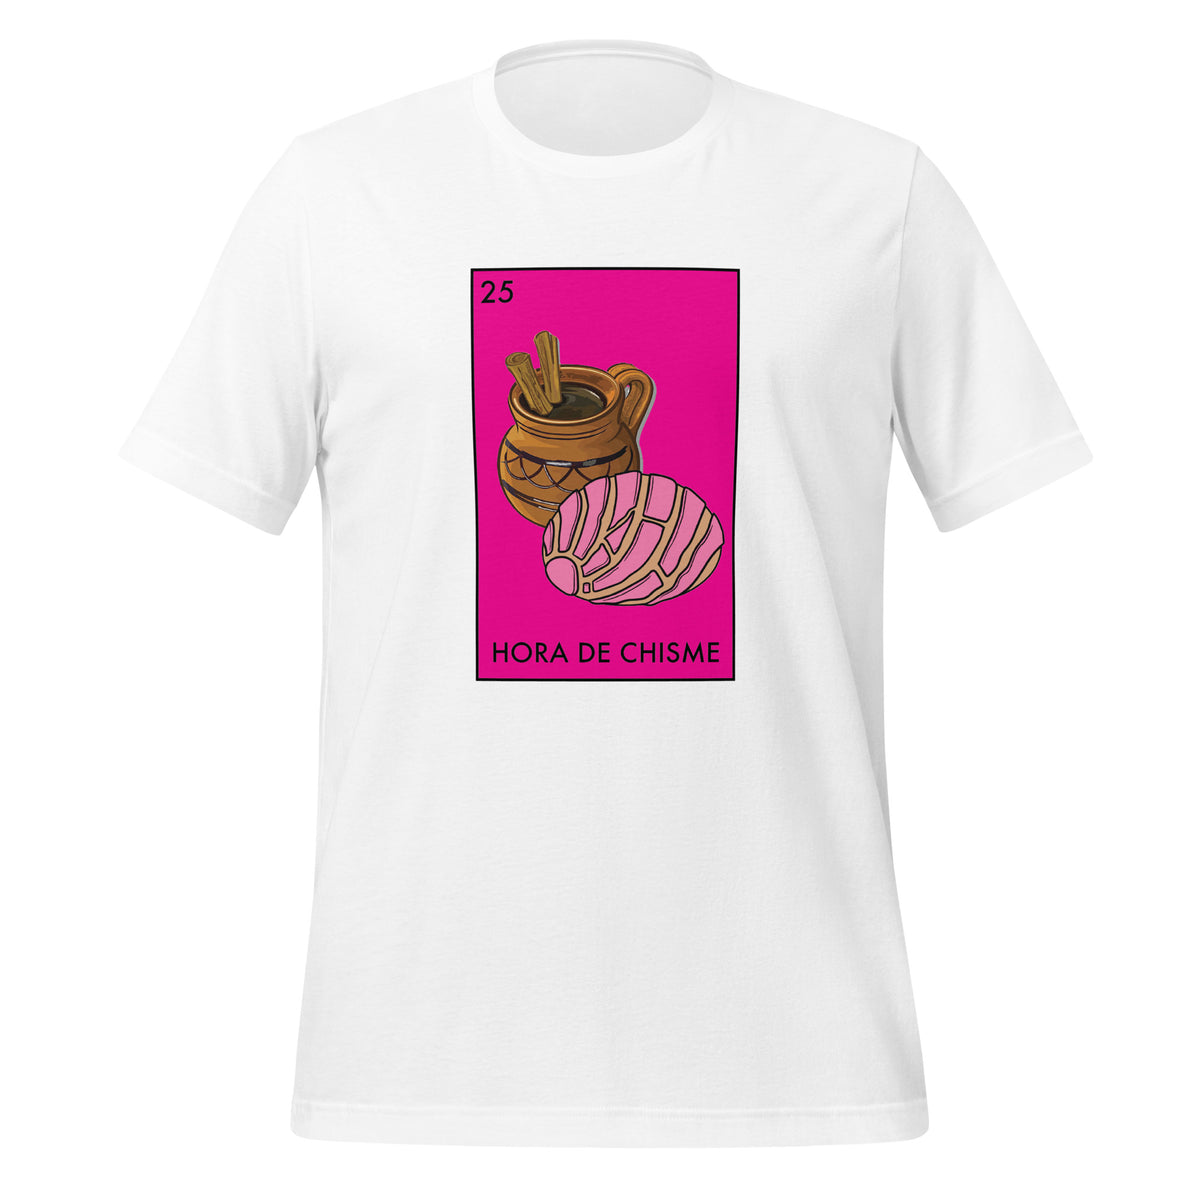 Chisme T-Shirt (Time for Gossip)